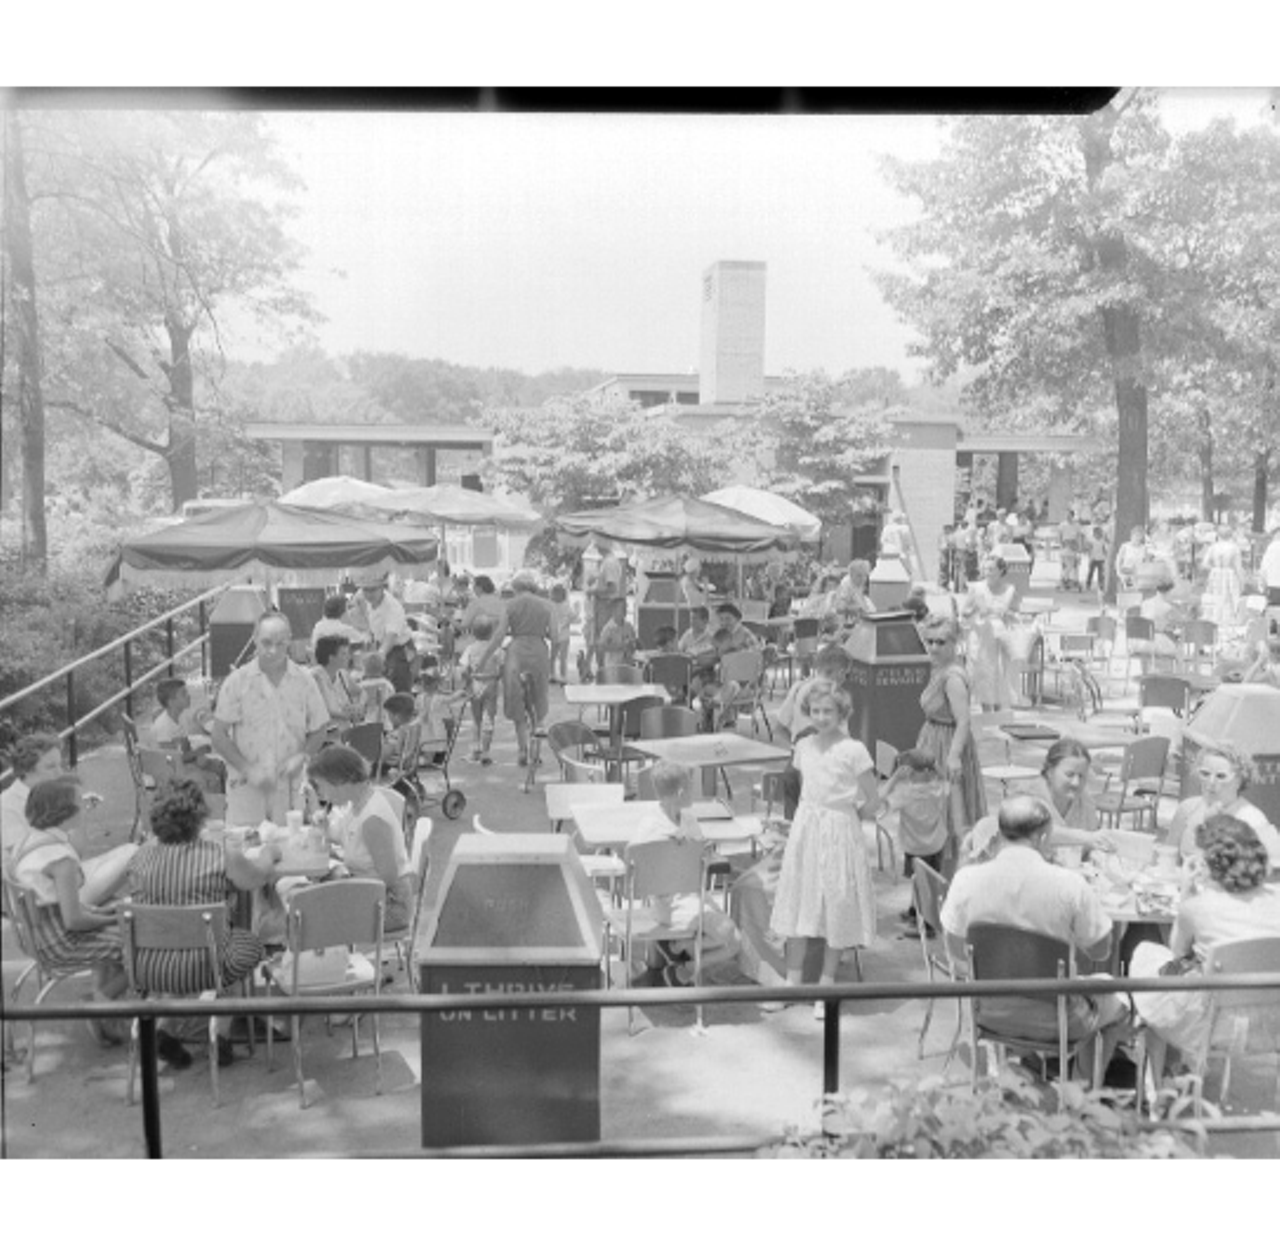 Patrons hanging out at the refreshment stand and terrace. (circa 1958)